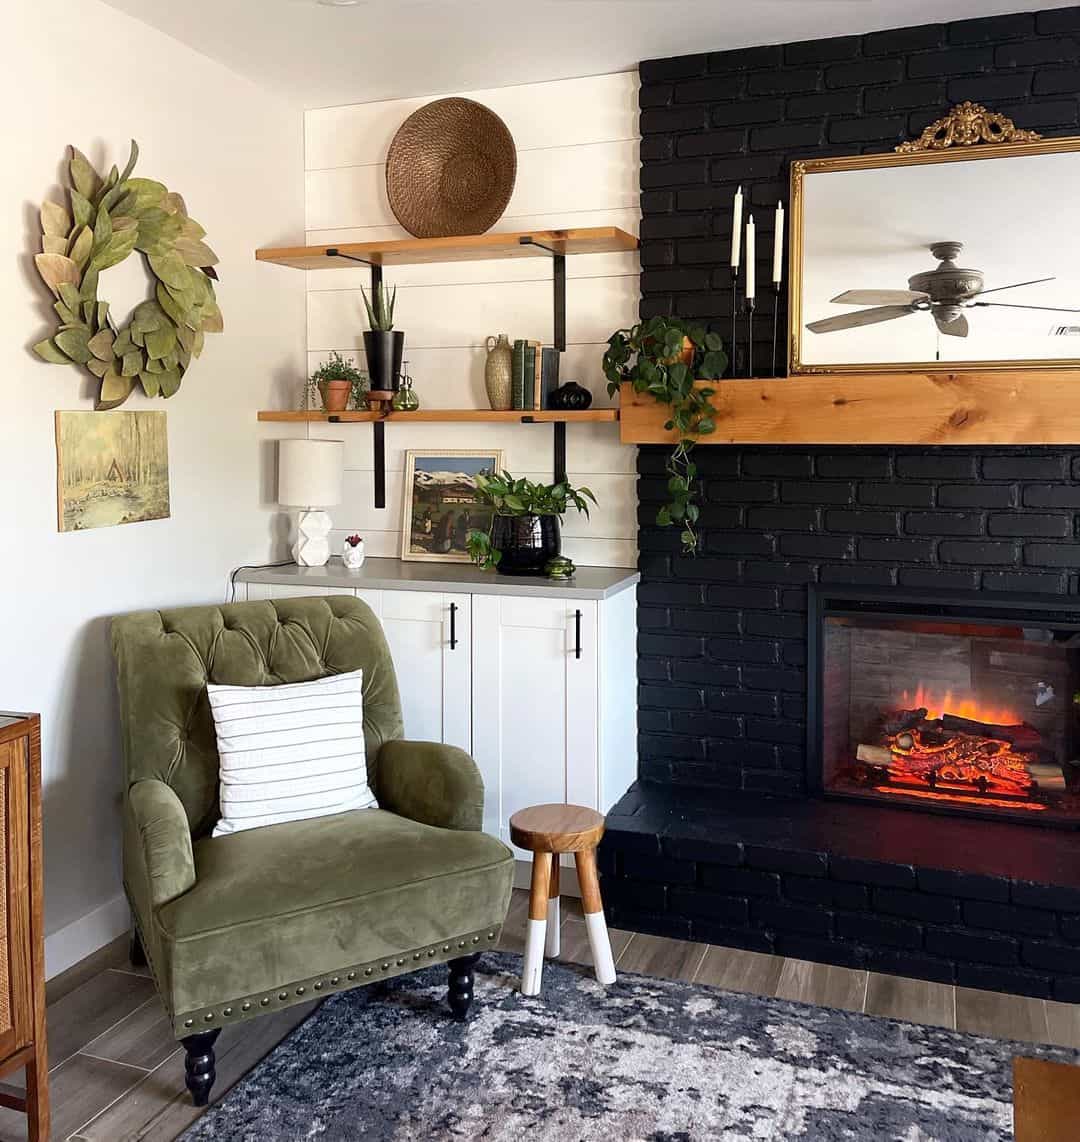 Cozy Green Chair in Cottage-Style Living Room